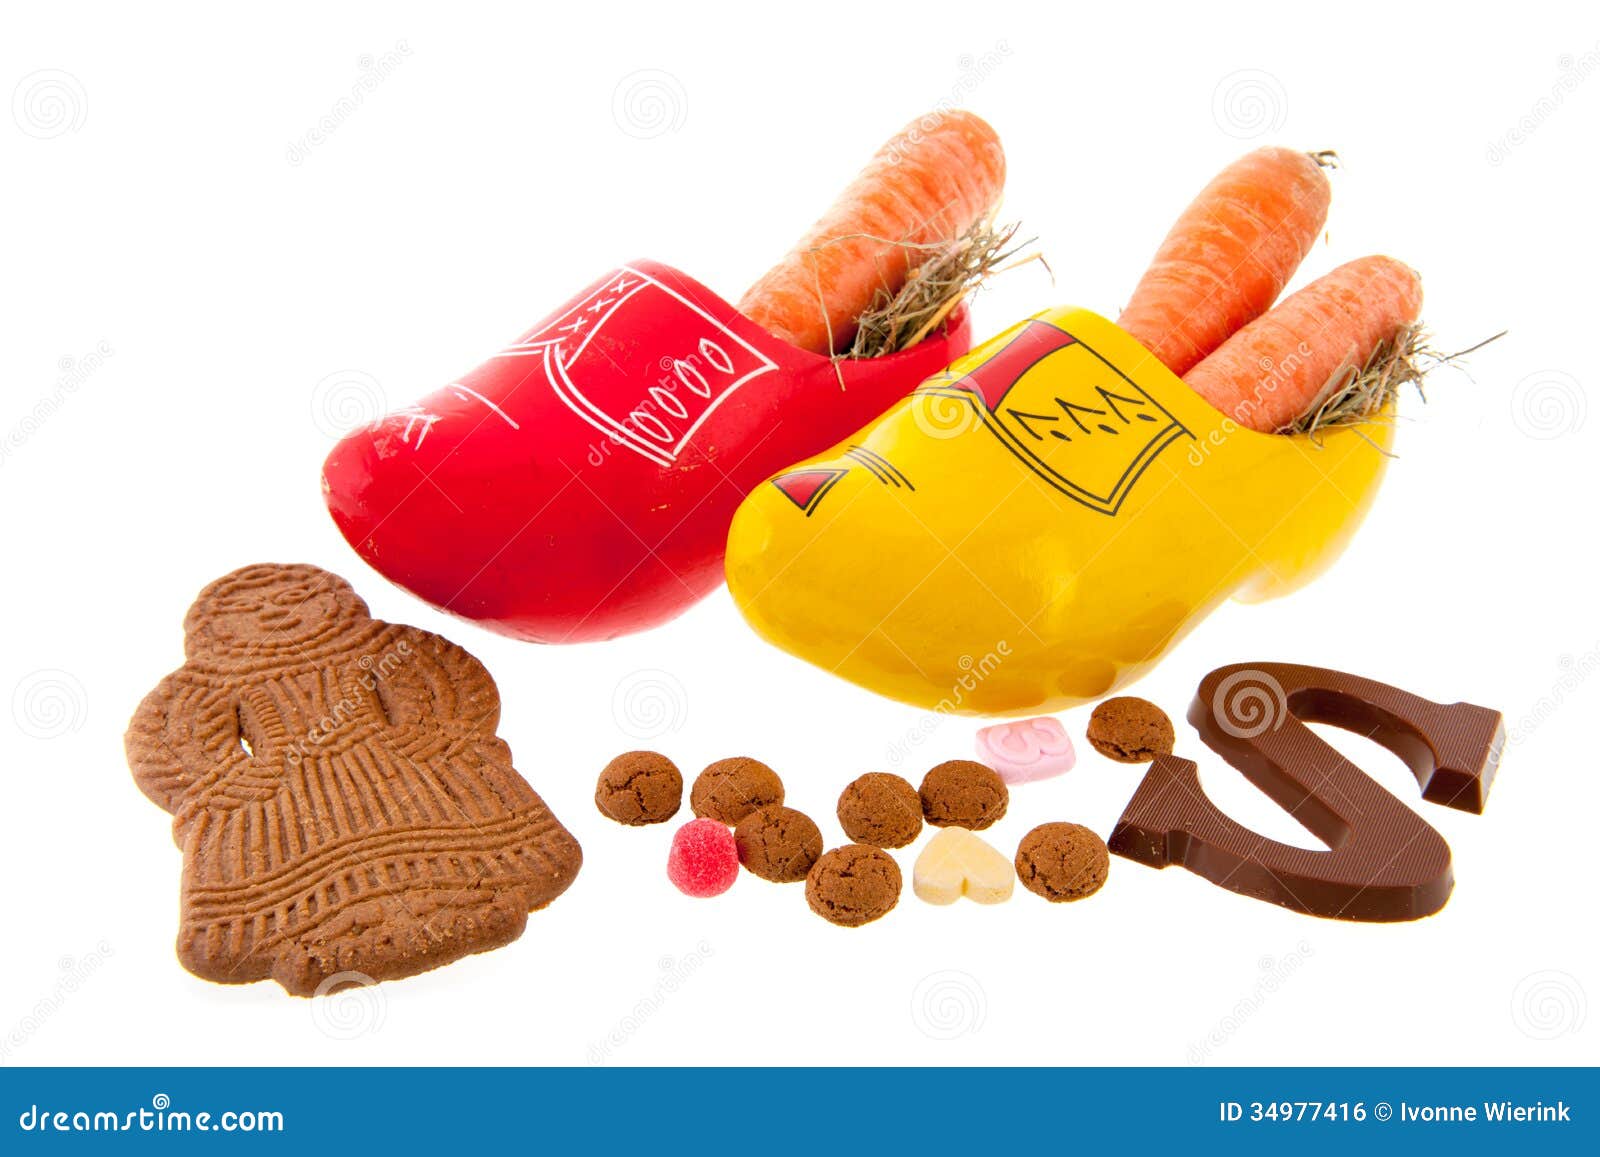 Dutch wooden clogs in red and yellow with carrots for the horse of 